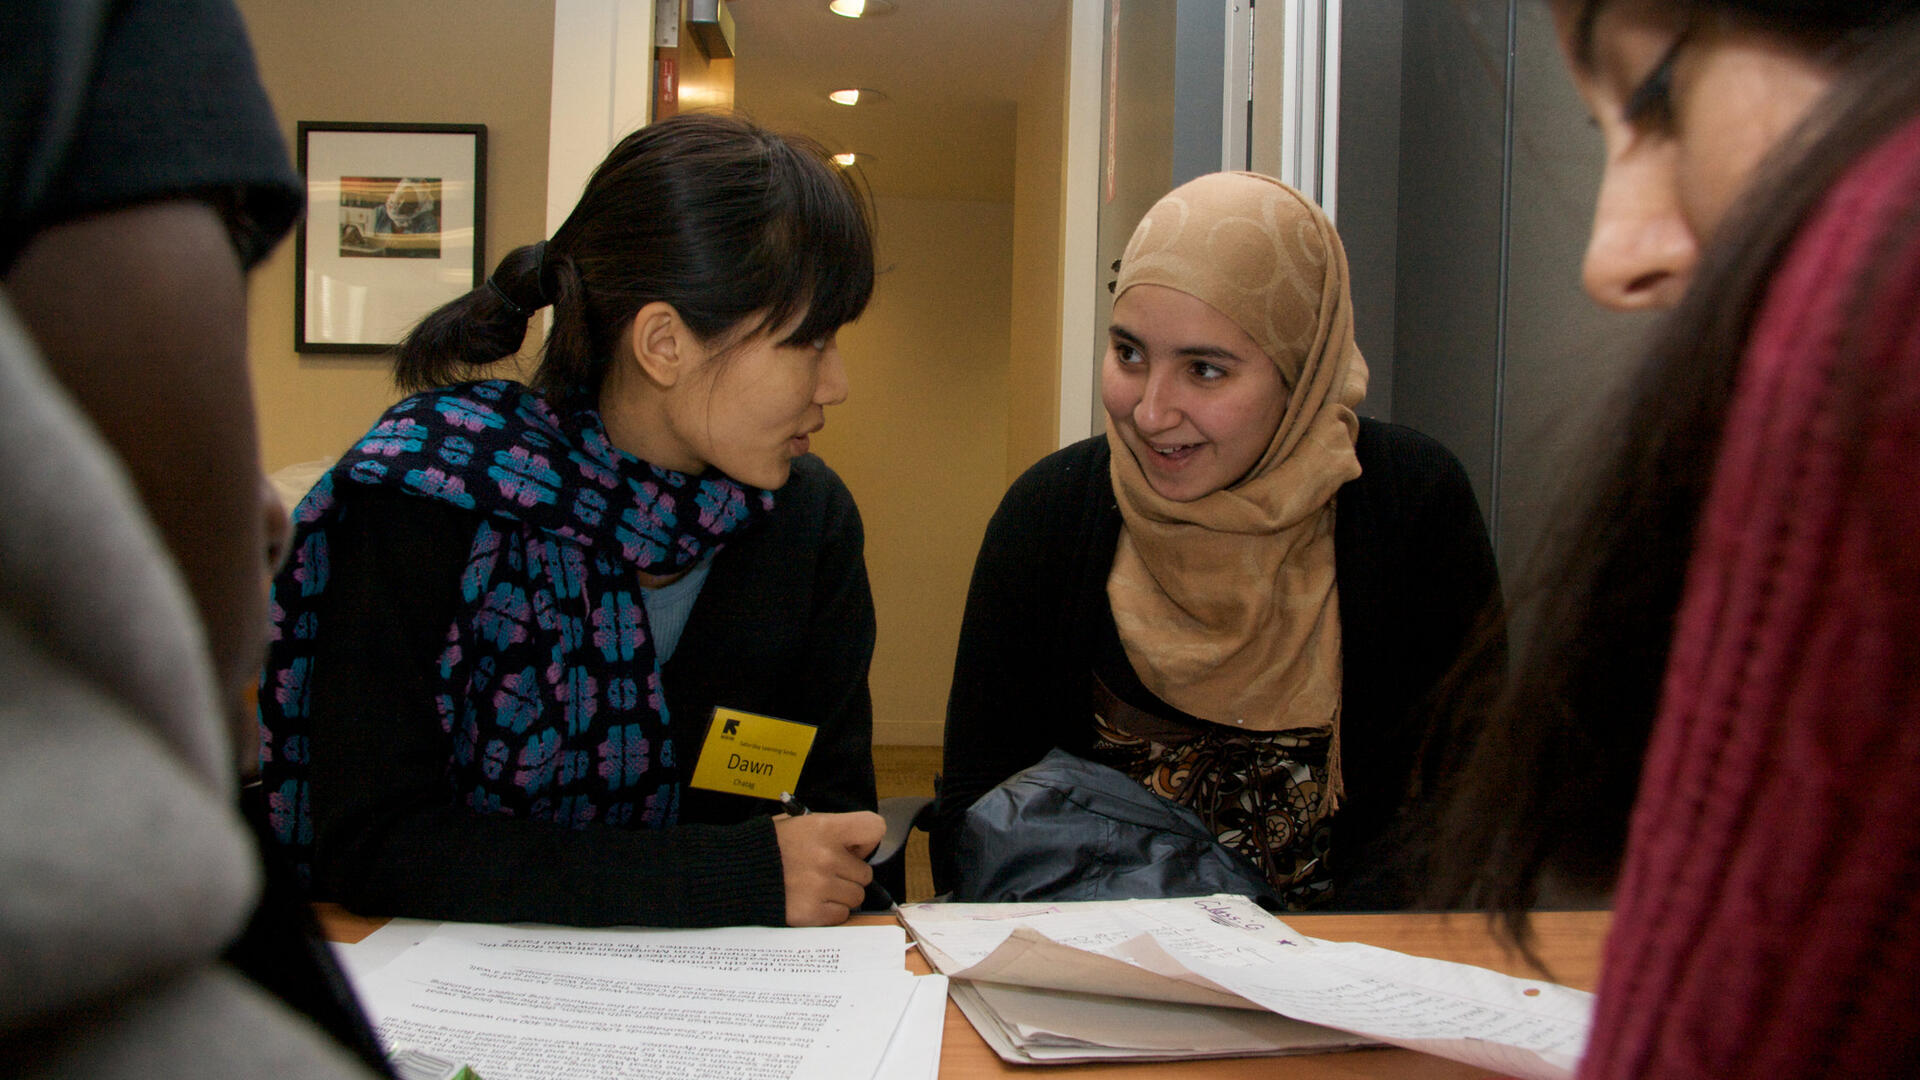 Volunteers work with refugees in an ESL class at the IRC resettlement office in New York